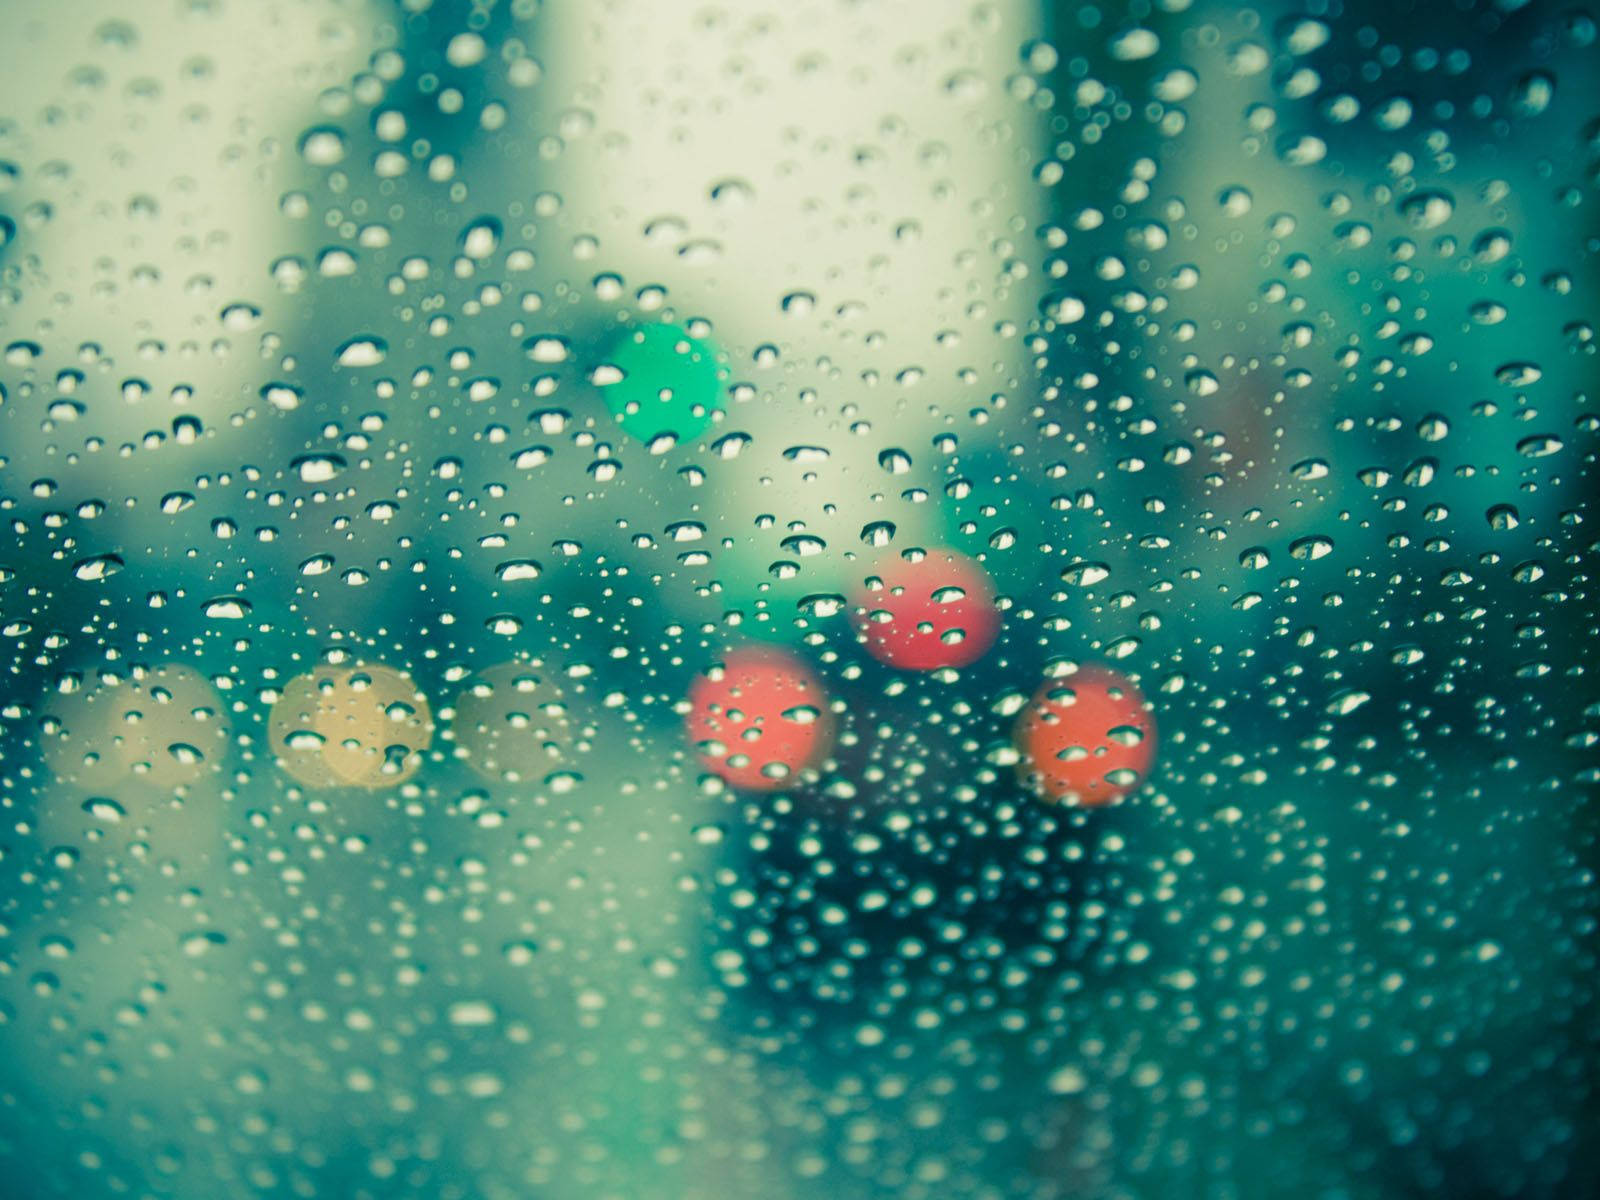 Bright Raindrops On A Car Glass Window Background